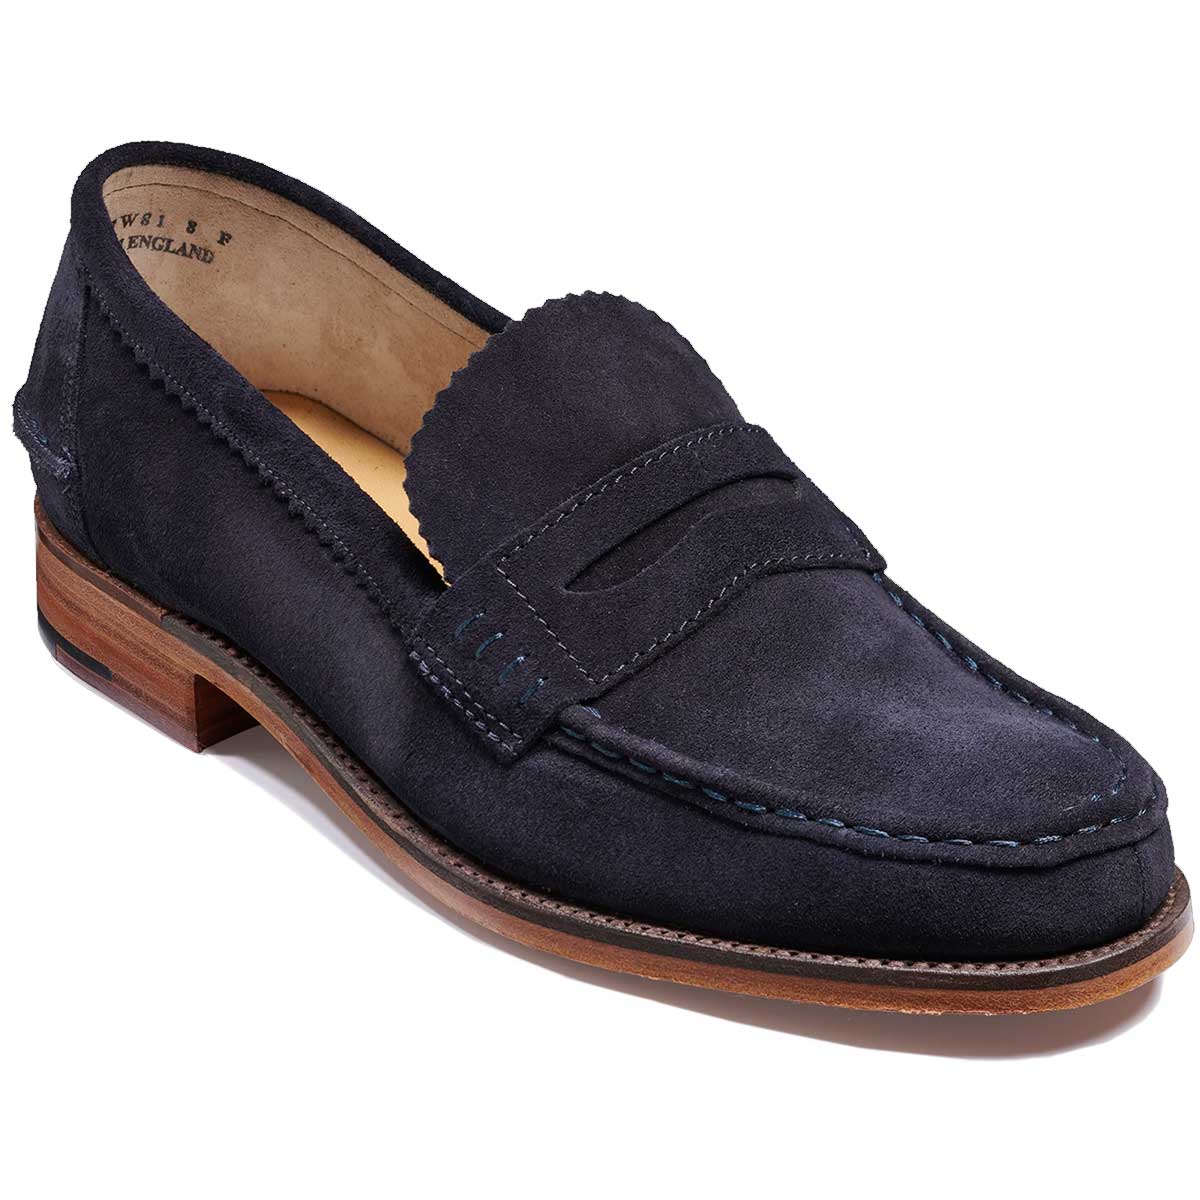 BARKER Caruso Shoes - Mens Loafers - Navy Suede